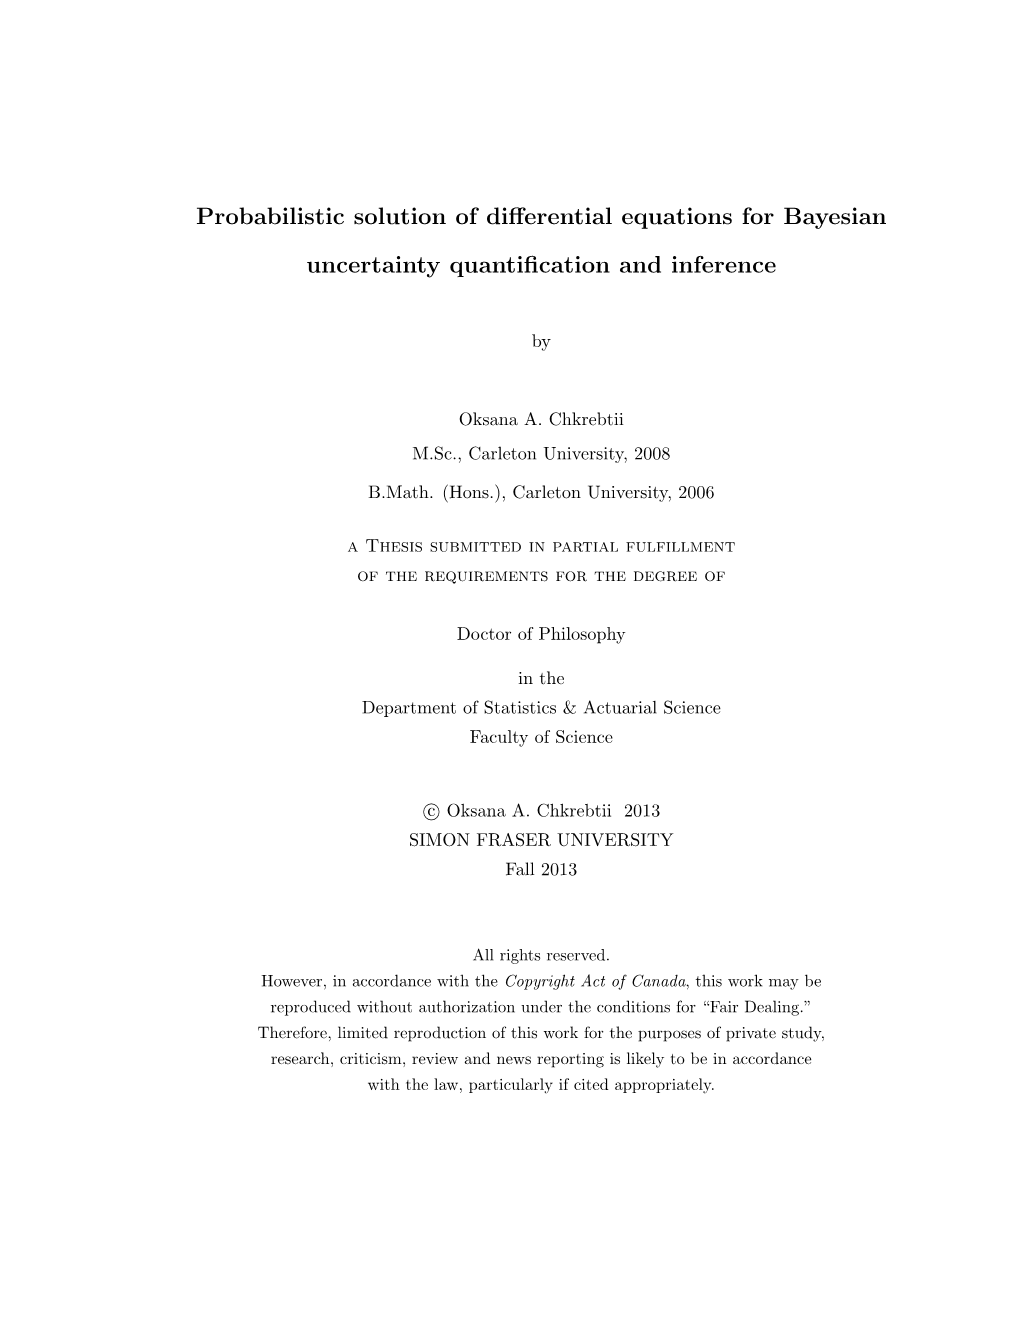 Probabilistic Solution of Differential Equations 38